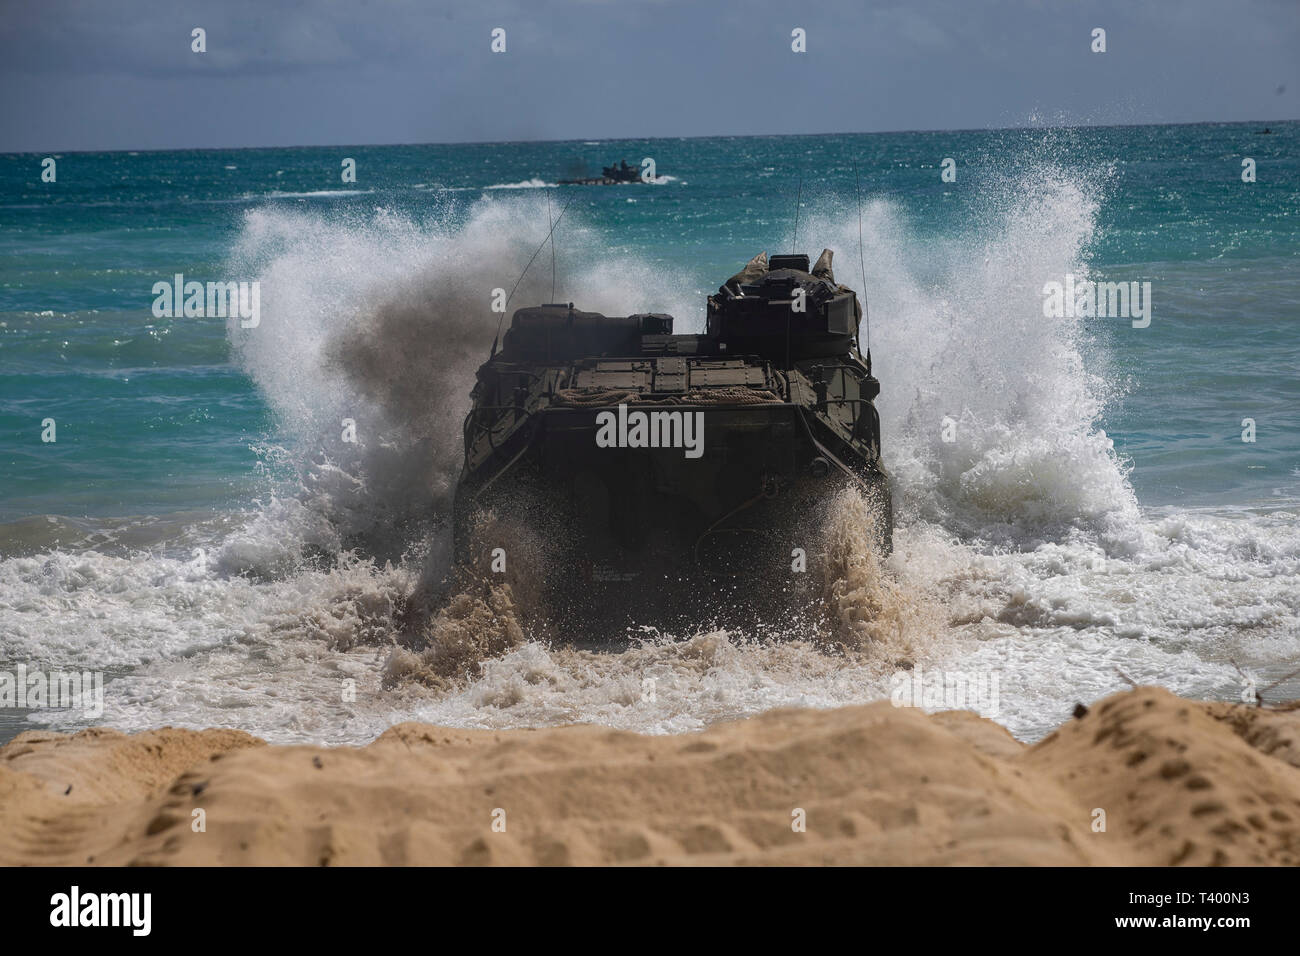 A U.S. Marine Corps amphibious assault vehicle assigned to Combat Assault Company, 3d Marine Regiment, crashes into the tides during an amphibious assault exercise at Marine Corps Training Area Bellows, Marine Corps Base Hawaii, Apr. 9, 2019. The unit conducted a simulated beach assault to improve their lethality and cooperation, as a mechanized unit and force in readiness. (U.S. Marine Corps photo by Sgt. Alex Kouns) Stock Photo